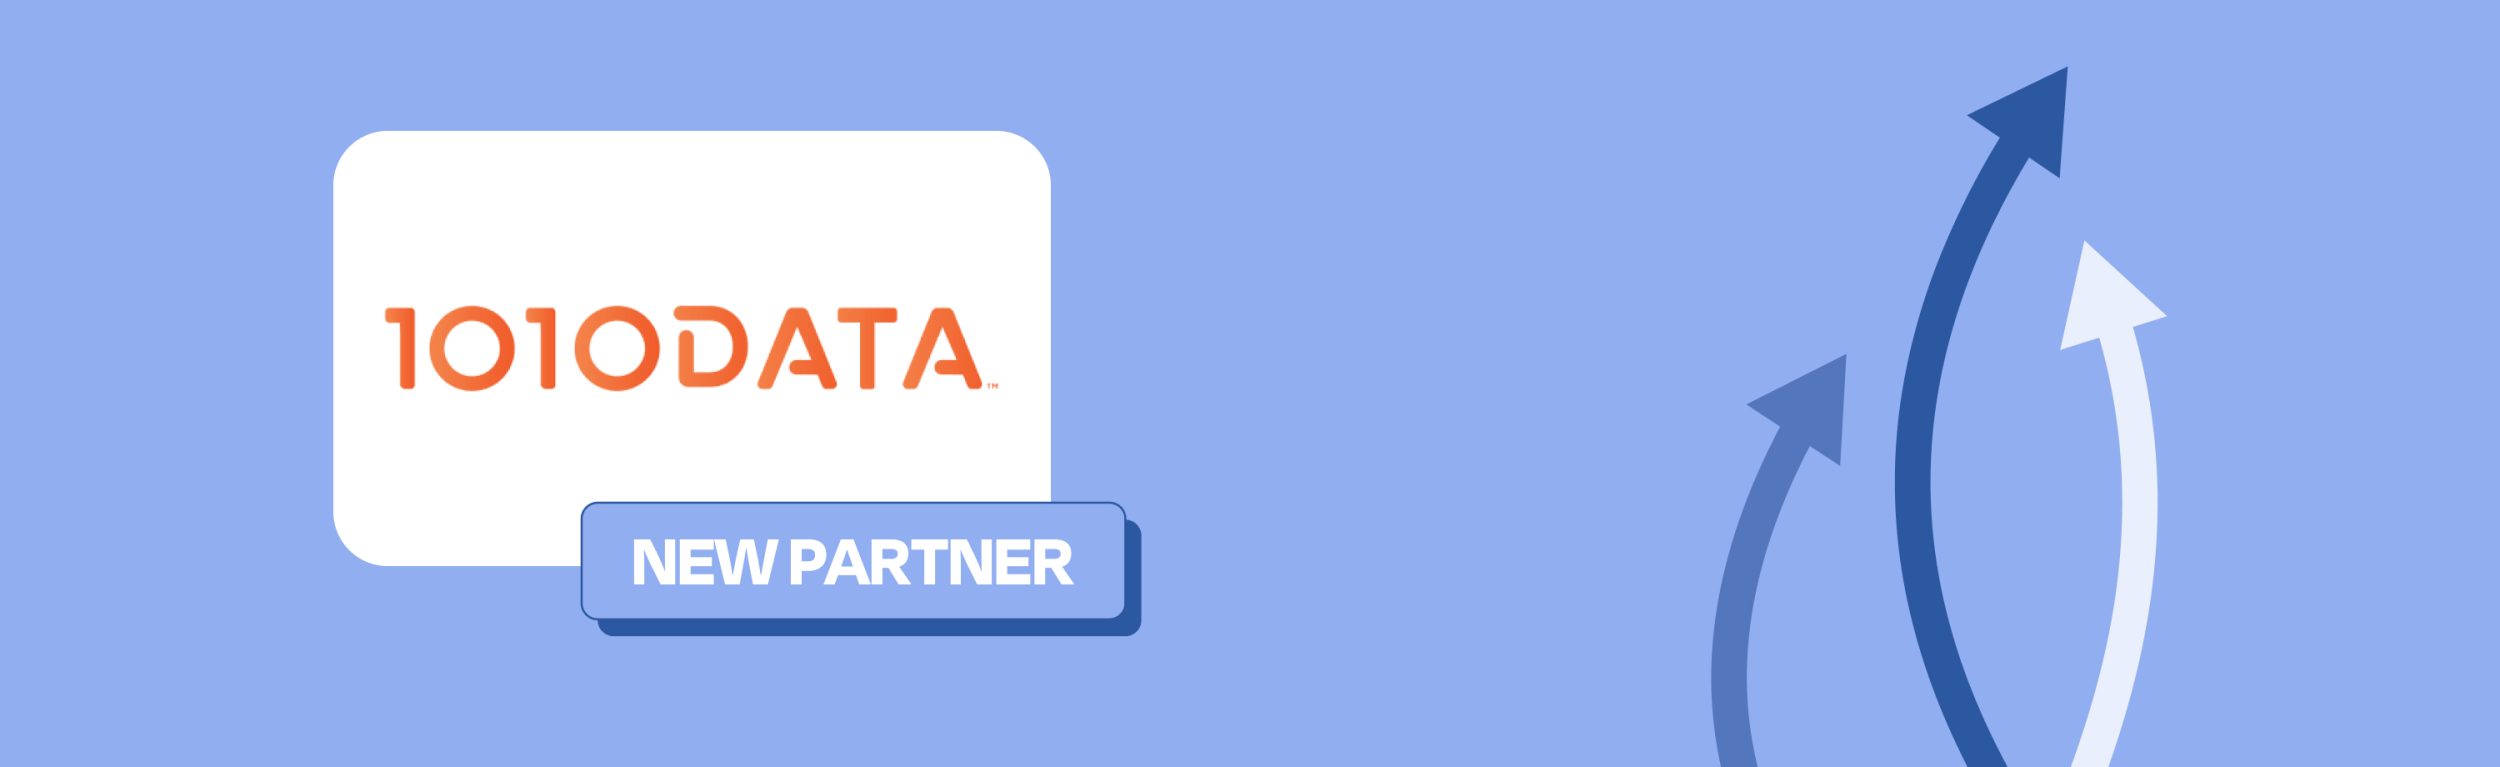 Colateral Partners with 1010data to Improve Retail Performance banner